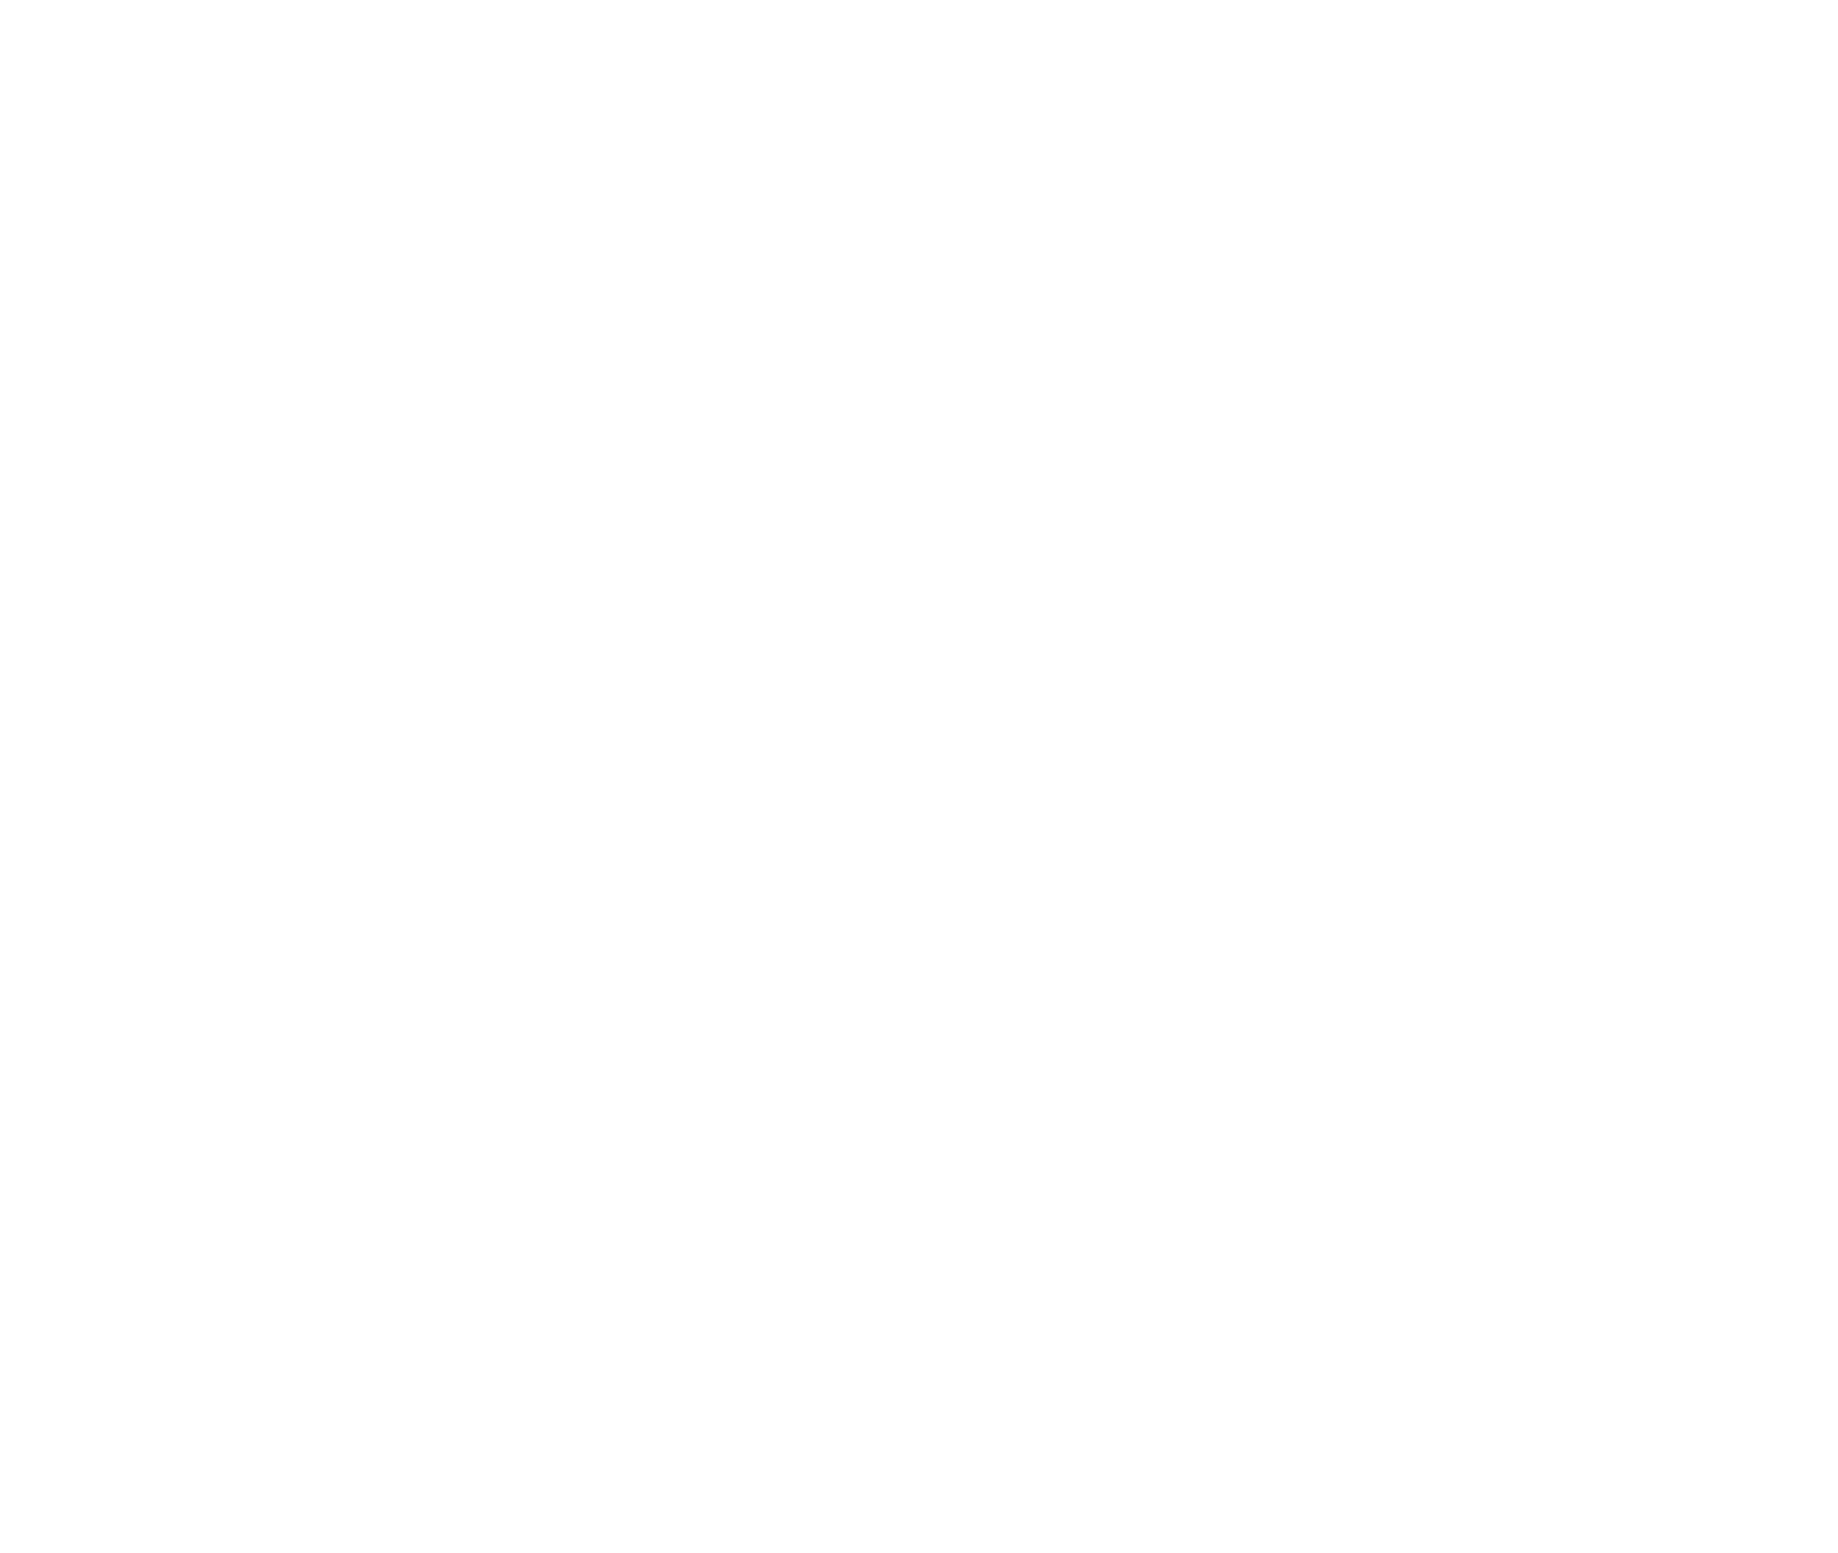 Orbital Velocity versus Radius for the Solar System. The Relationship is described by Kepler’s Law. The Orbital Velocity distinctly decreases as you move further the center. (Rubin 1983)